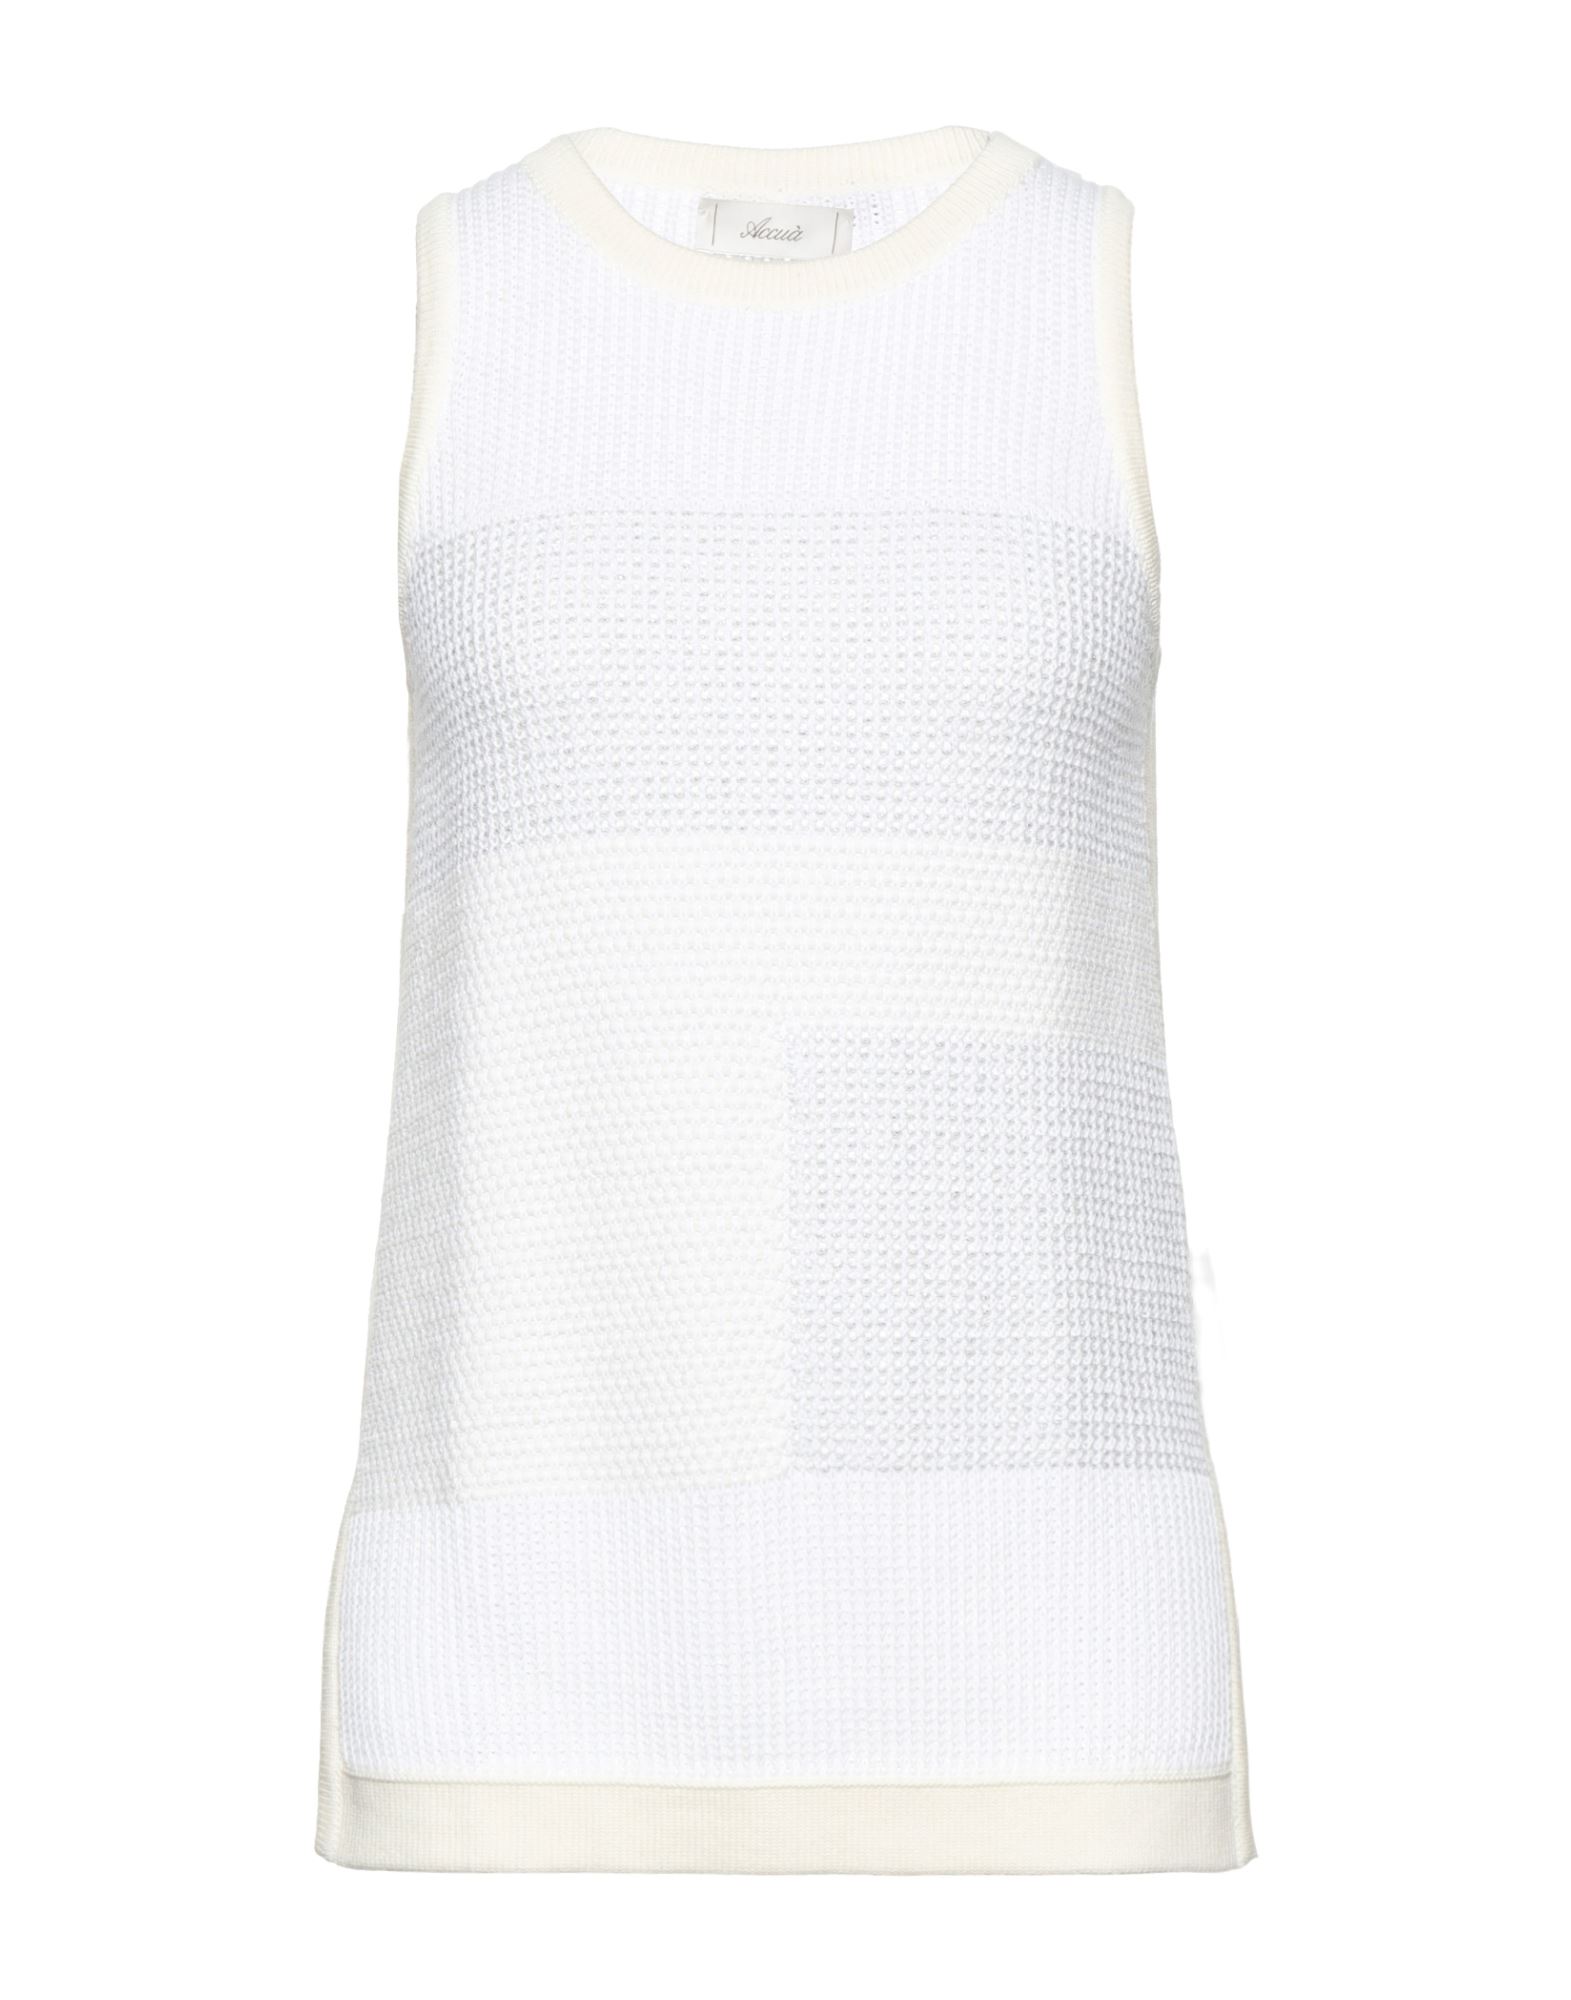 Accuà By Psr Tops In White